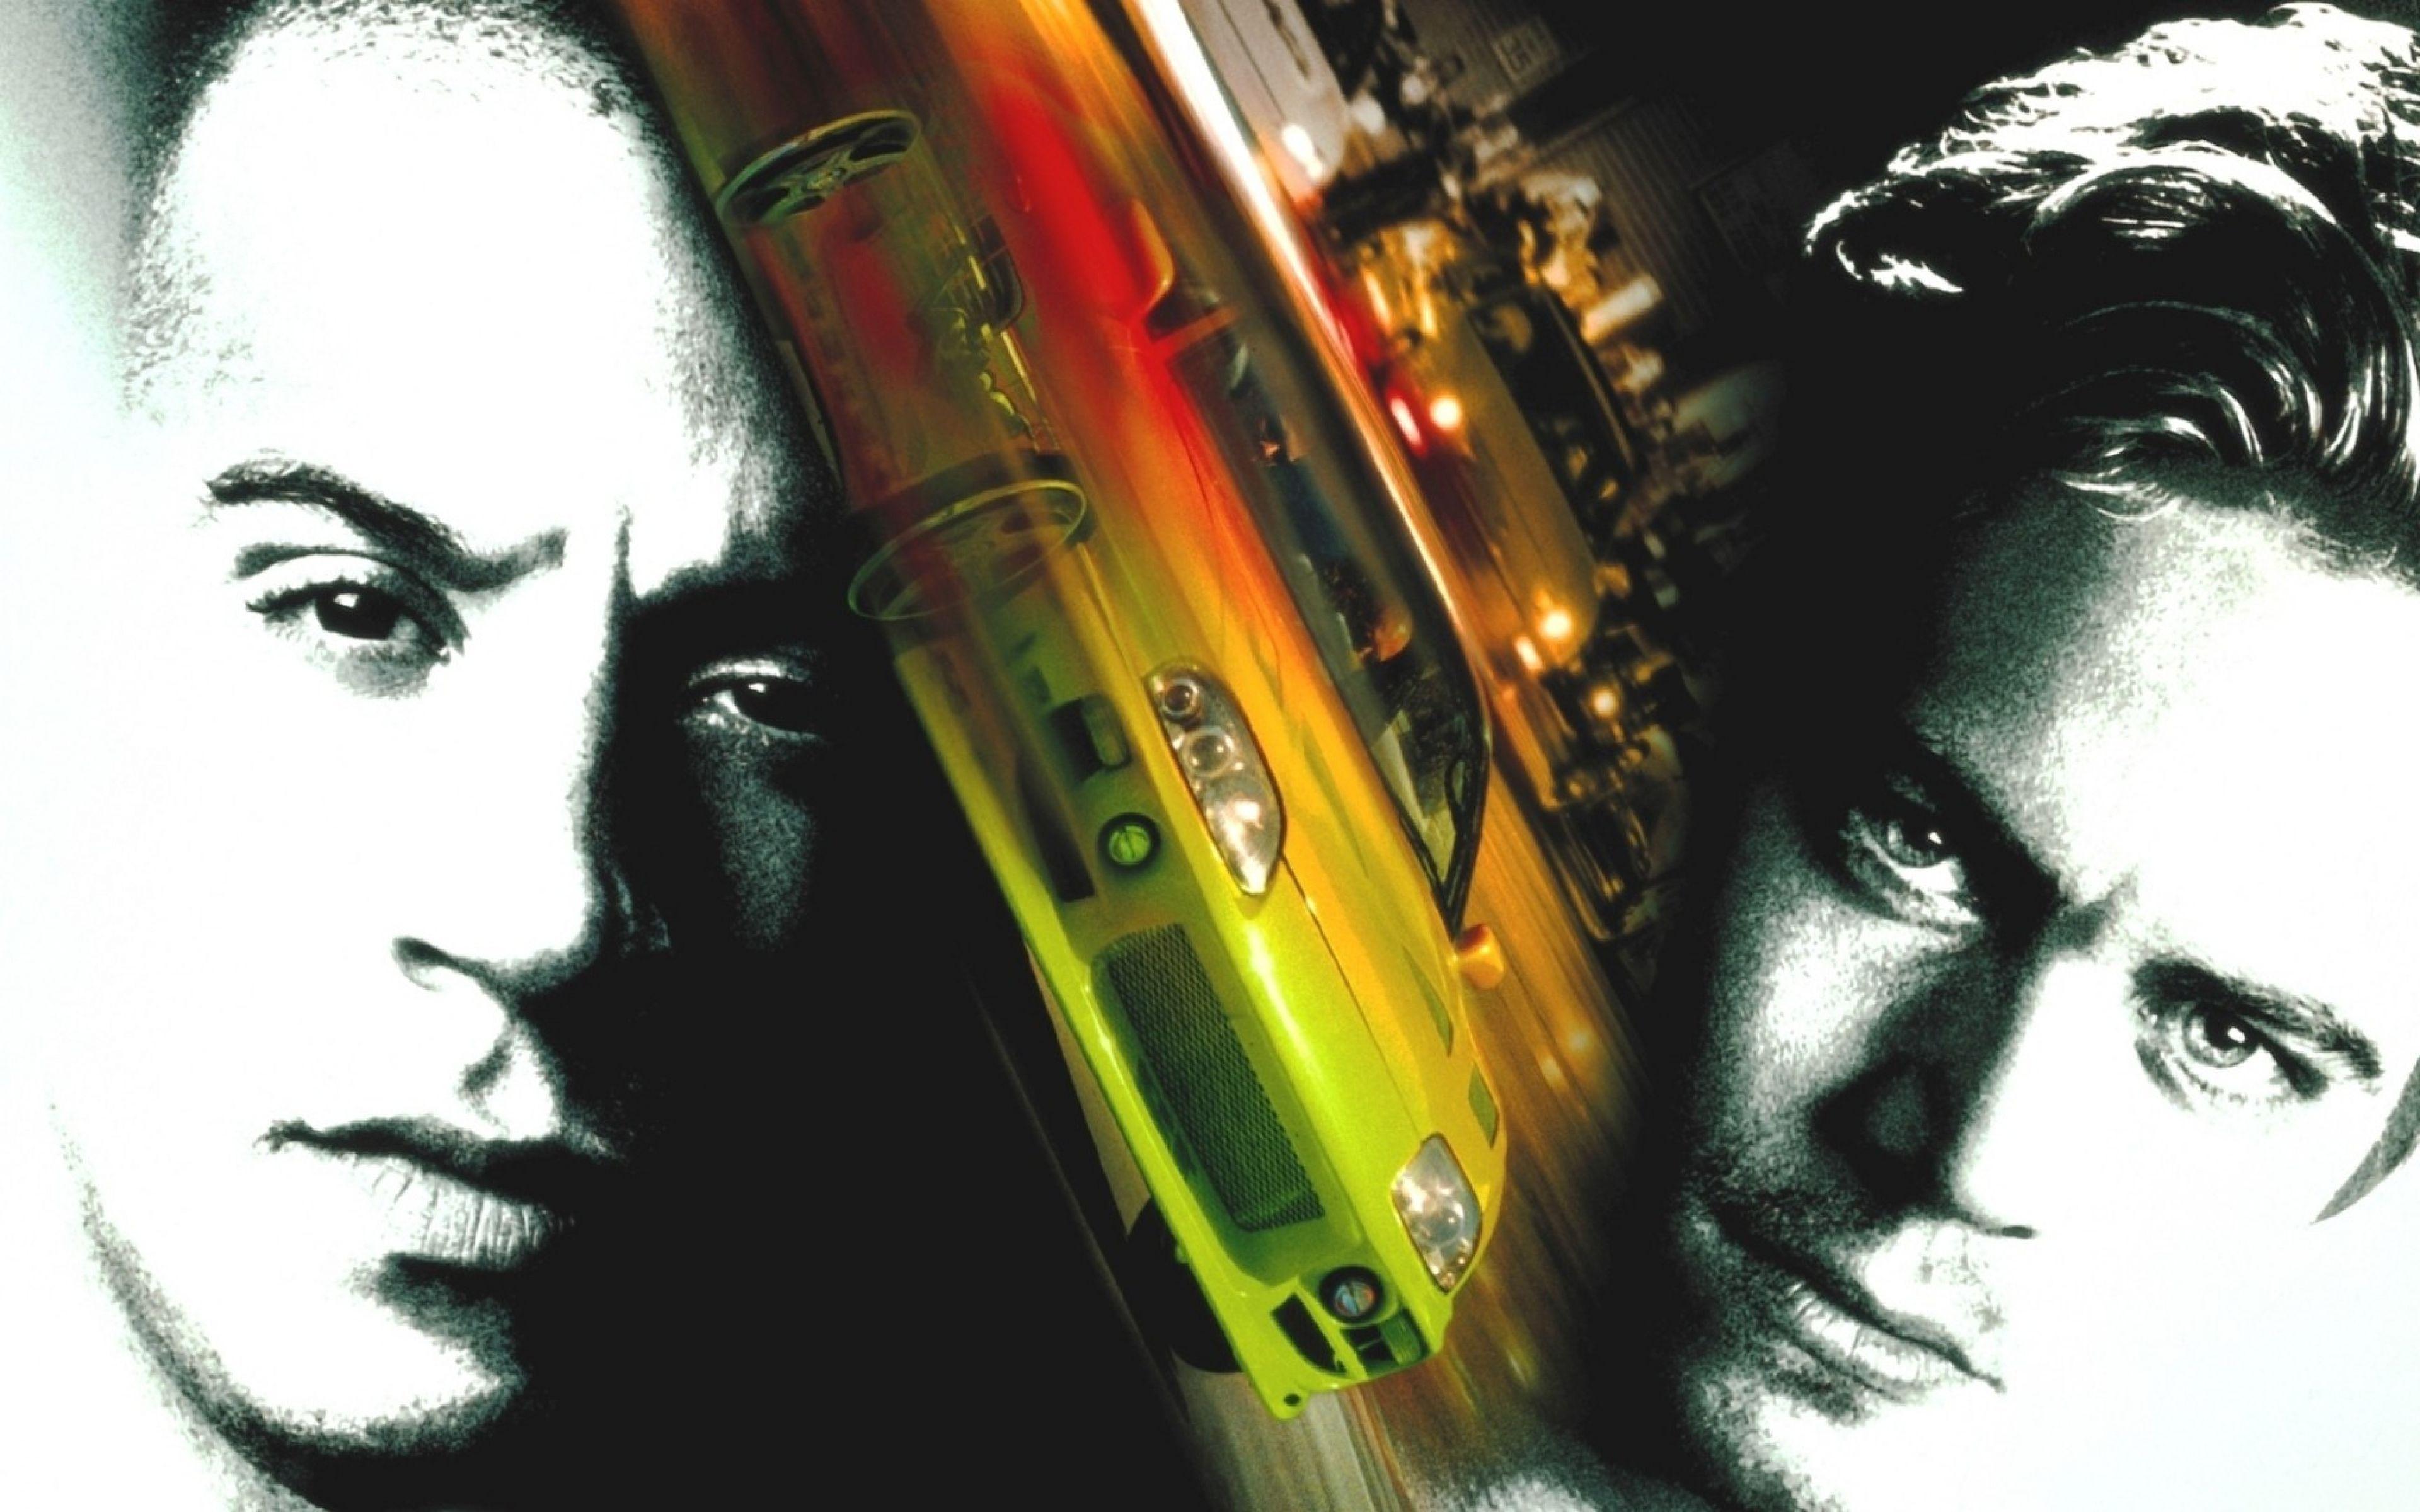 Download Wallpaper 3840x2400 The fast and the furious, Vin diesel